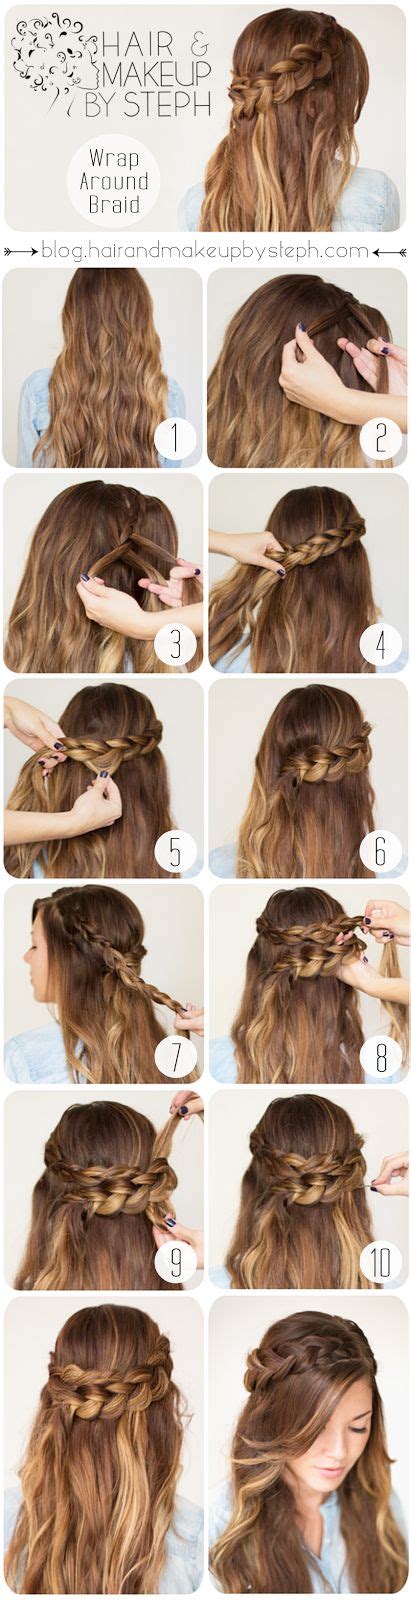 Hair style pictures can be great tools for anyone interested in a new look. 15 Super Easy Hairstyles With Tutorials - Pretty Designs